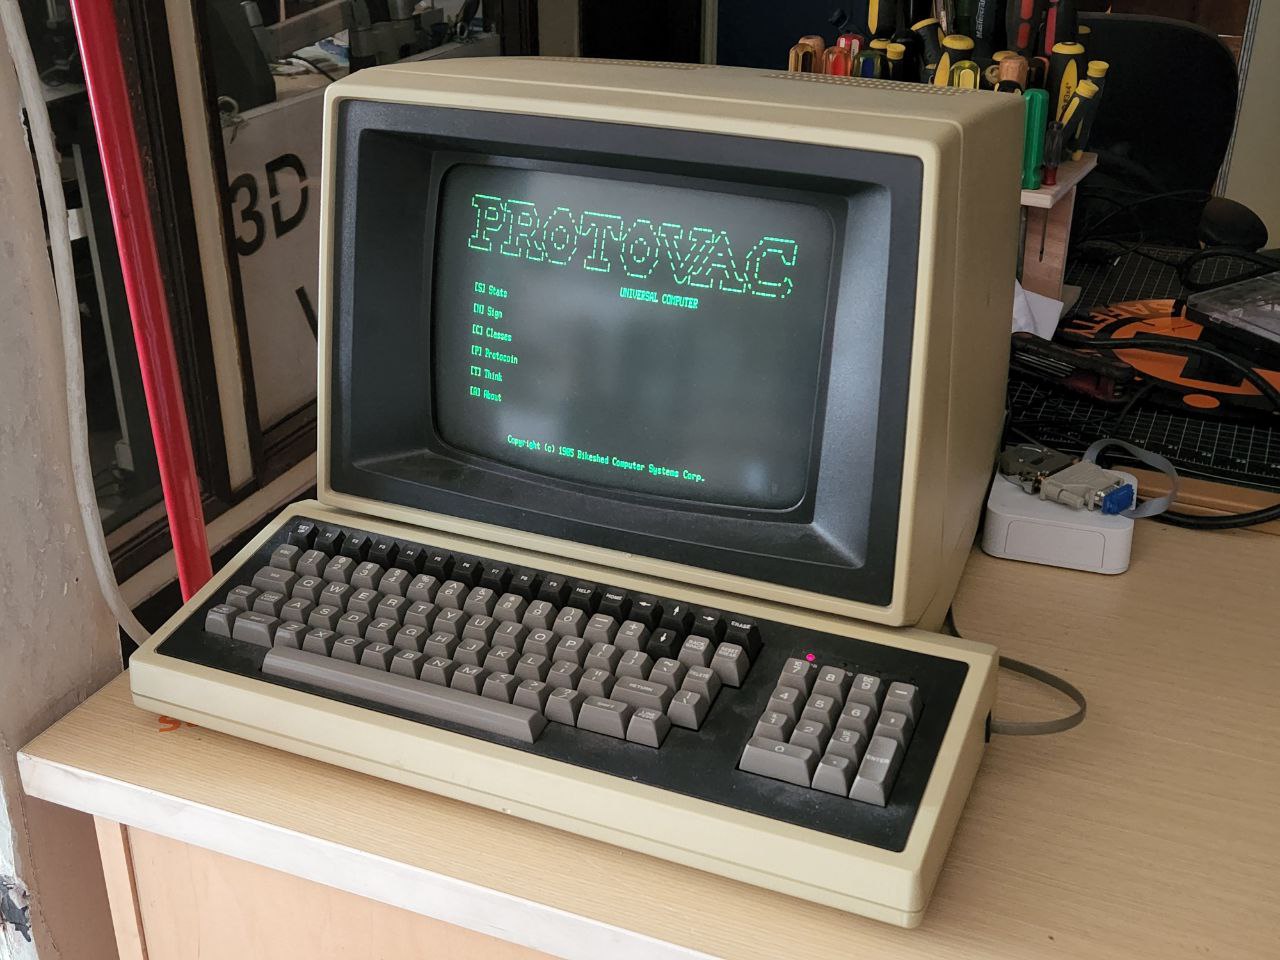 and old CRT screen from 1983 with a keyboard infront of it